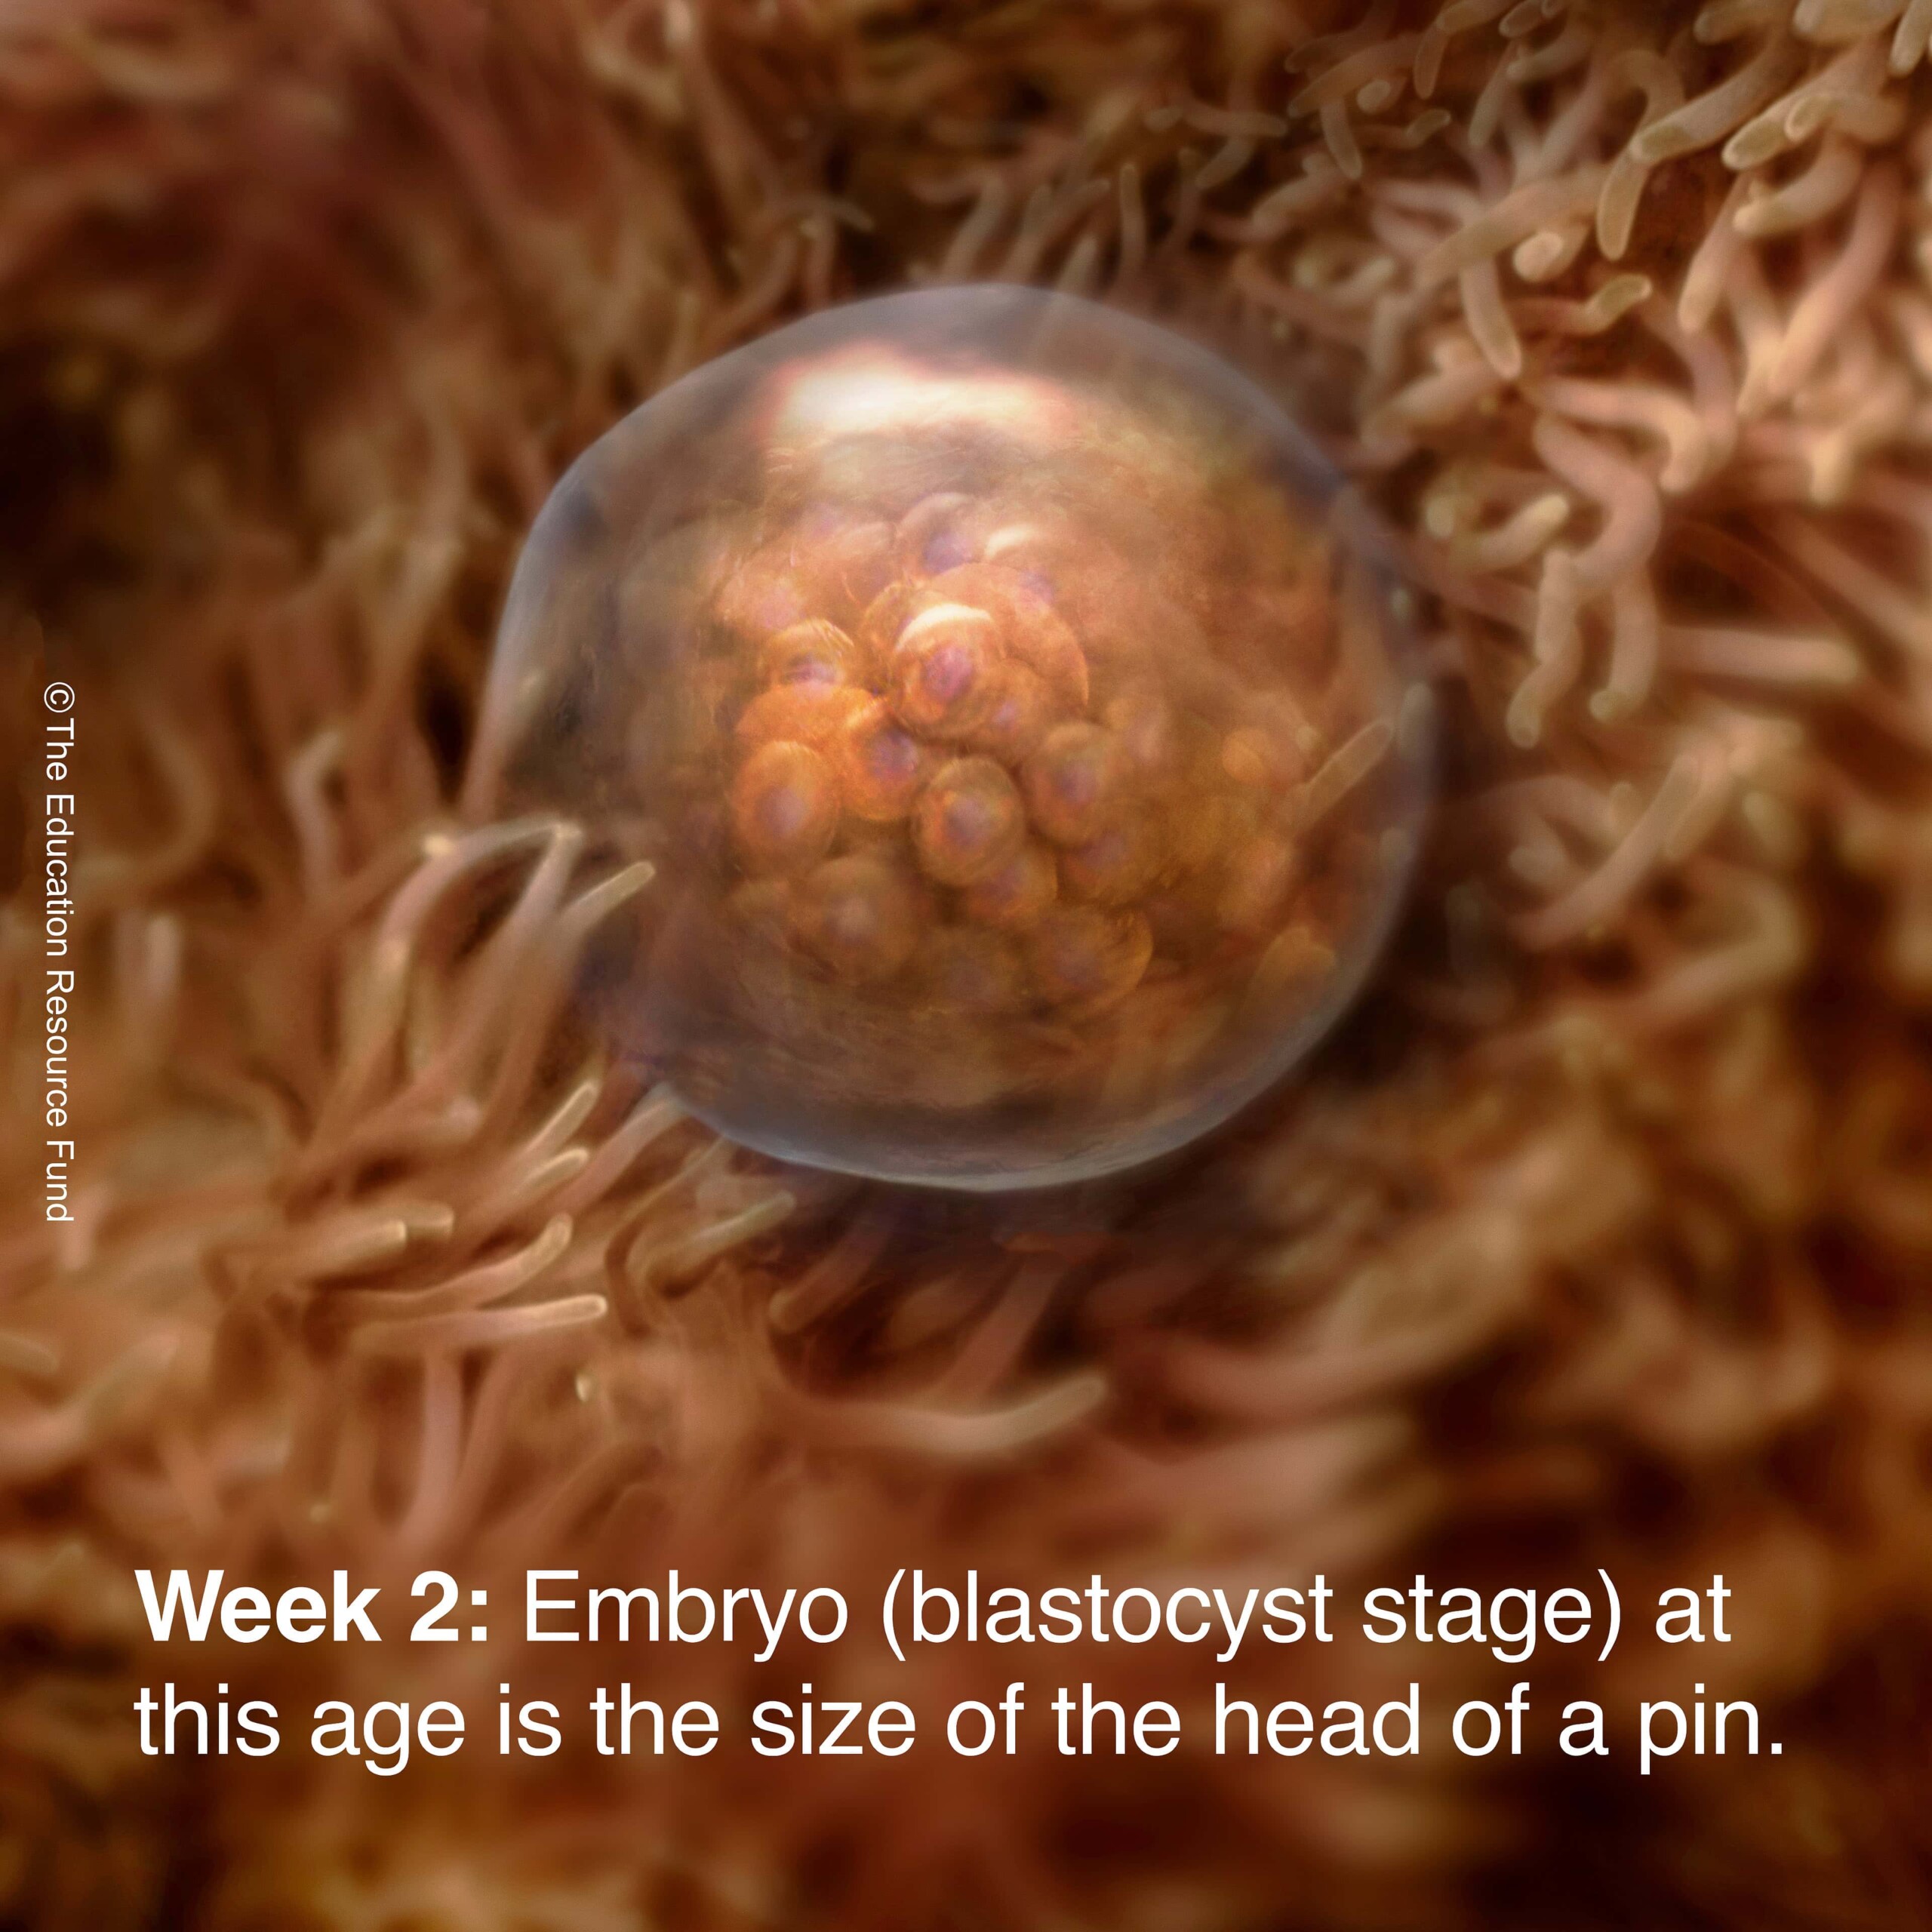 Week 2: Embryo (blastocyst stage) at this age is the size of the head of a pin.